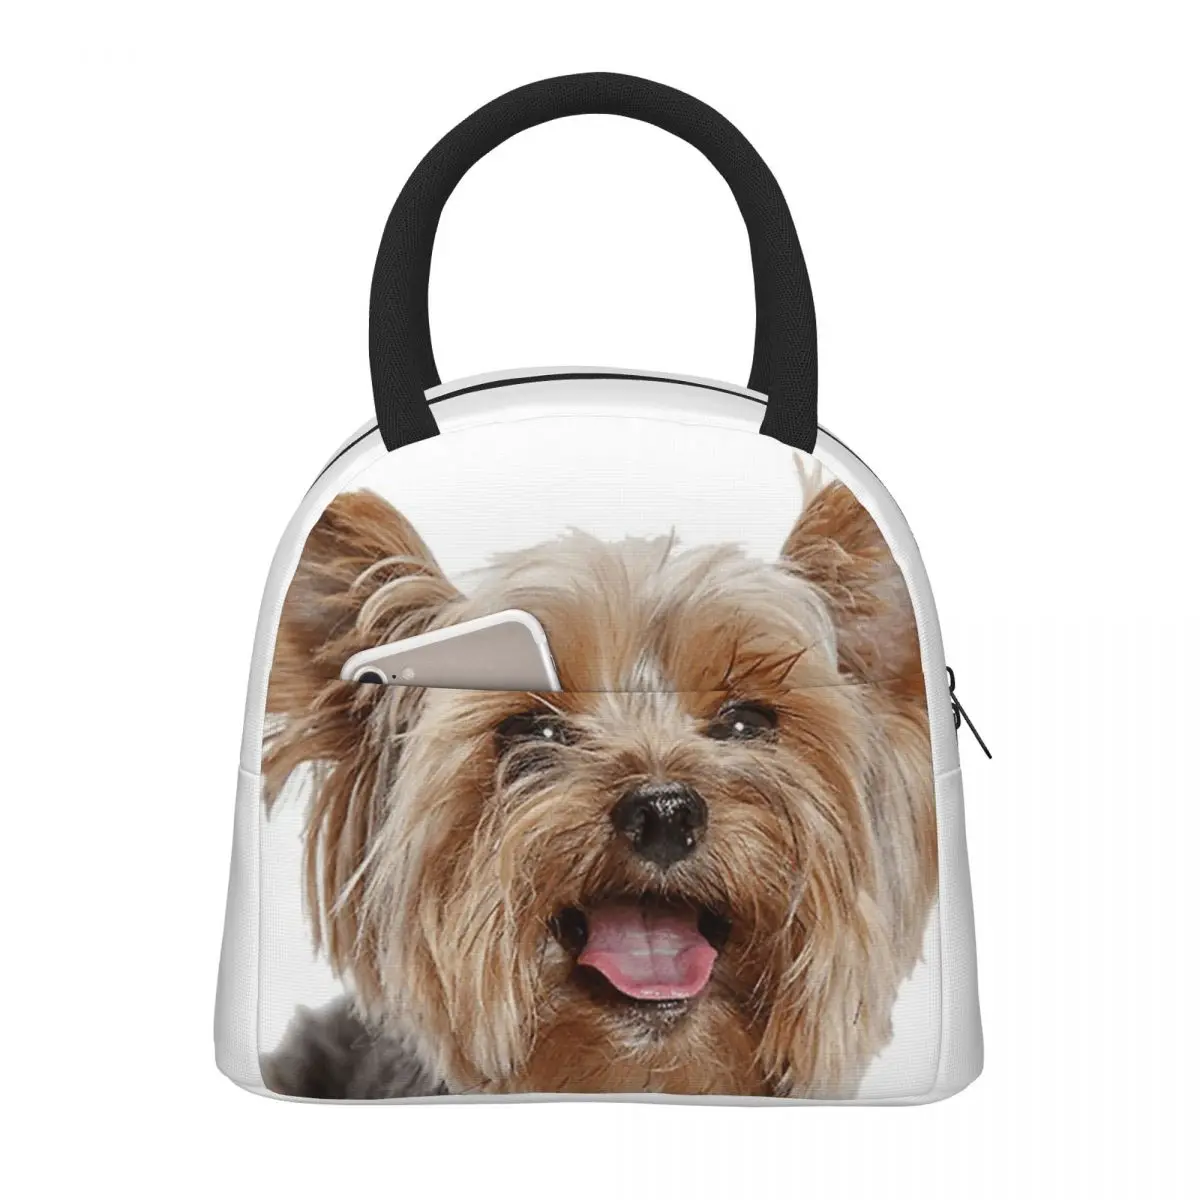 Cute Yorkie Yorkshire Terrier Lunch Bag Waterproof Insulated Cooler Dog Puppy Thermal Cold Food Picnic Lunch Box for Women Kids